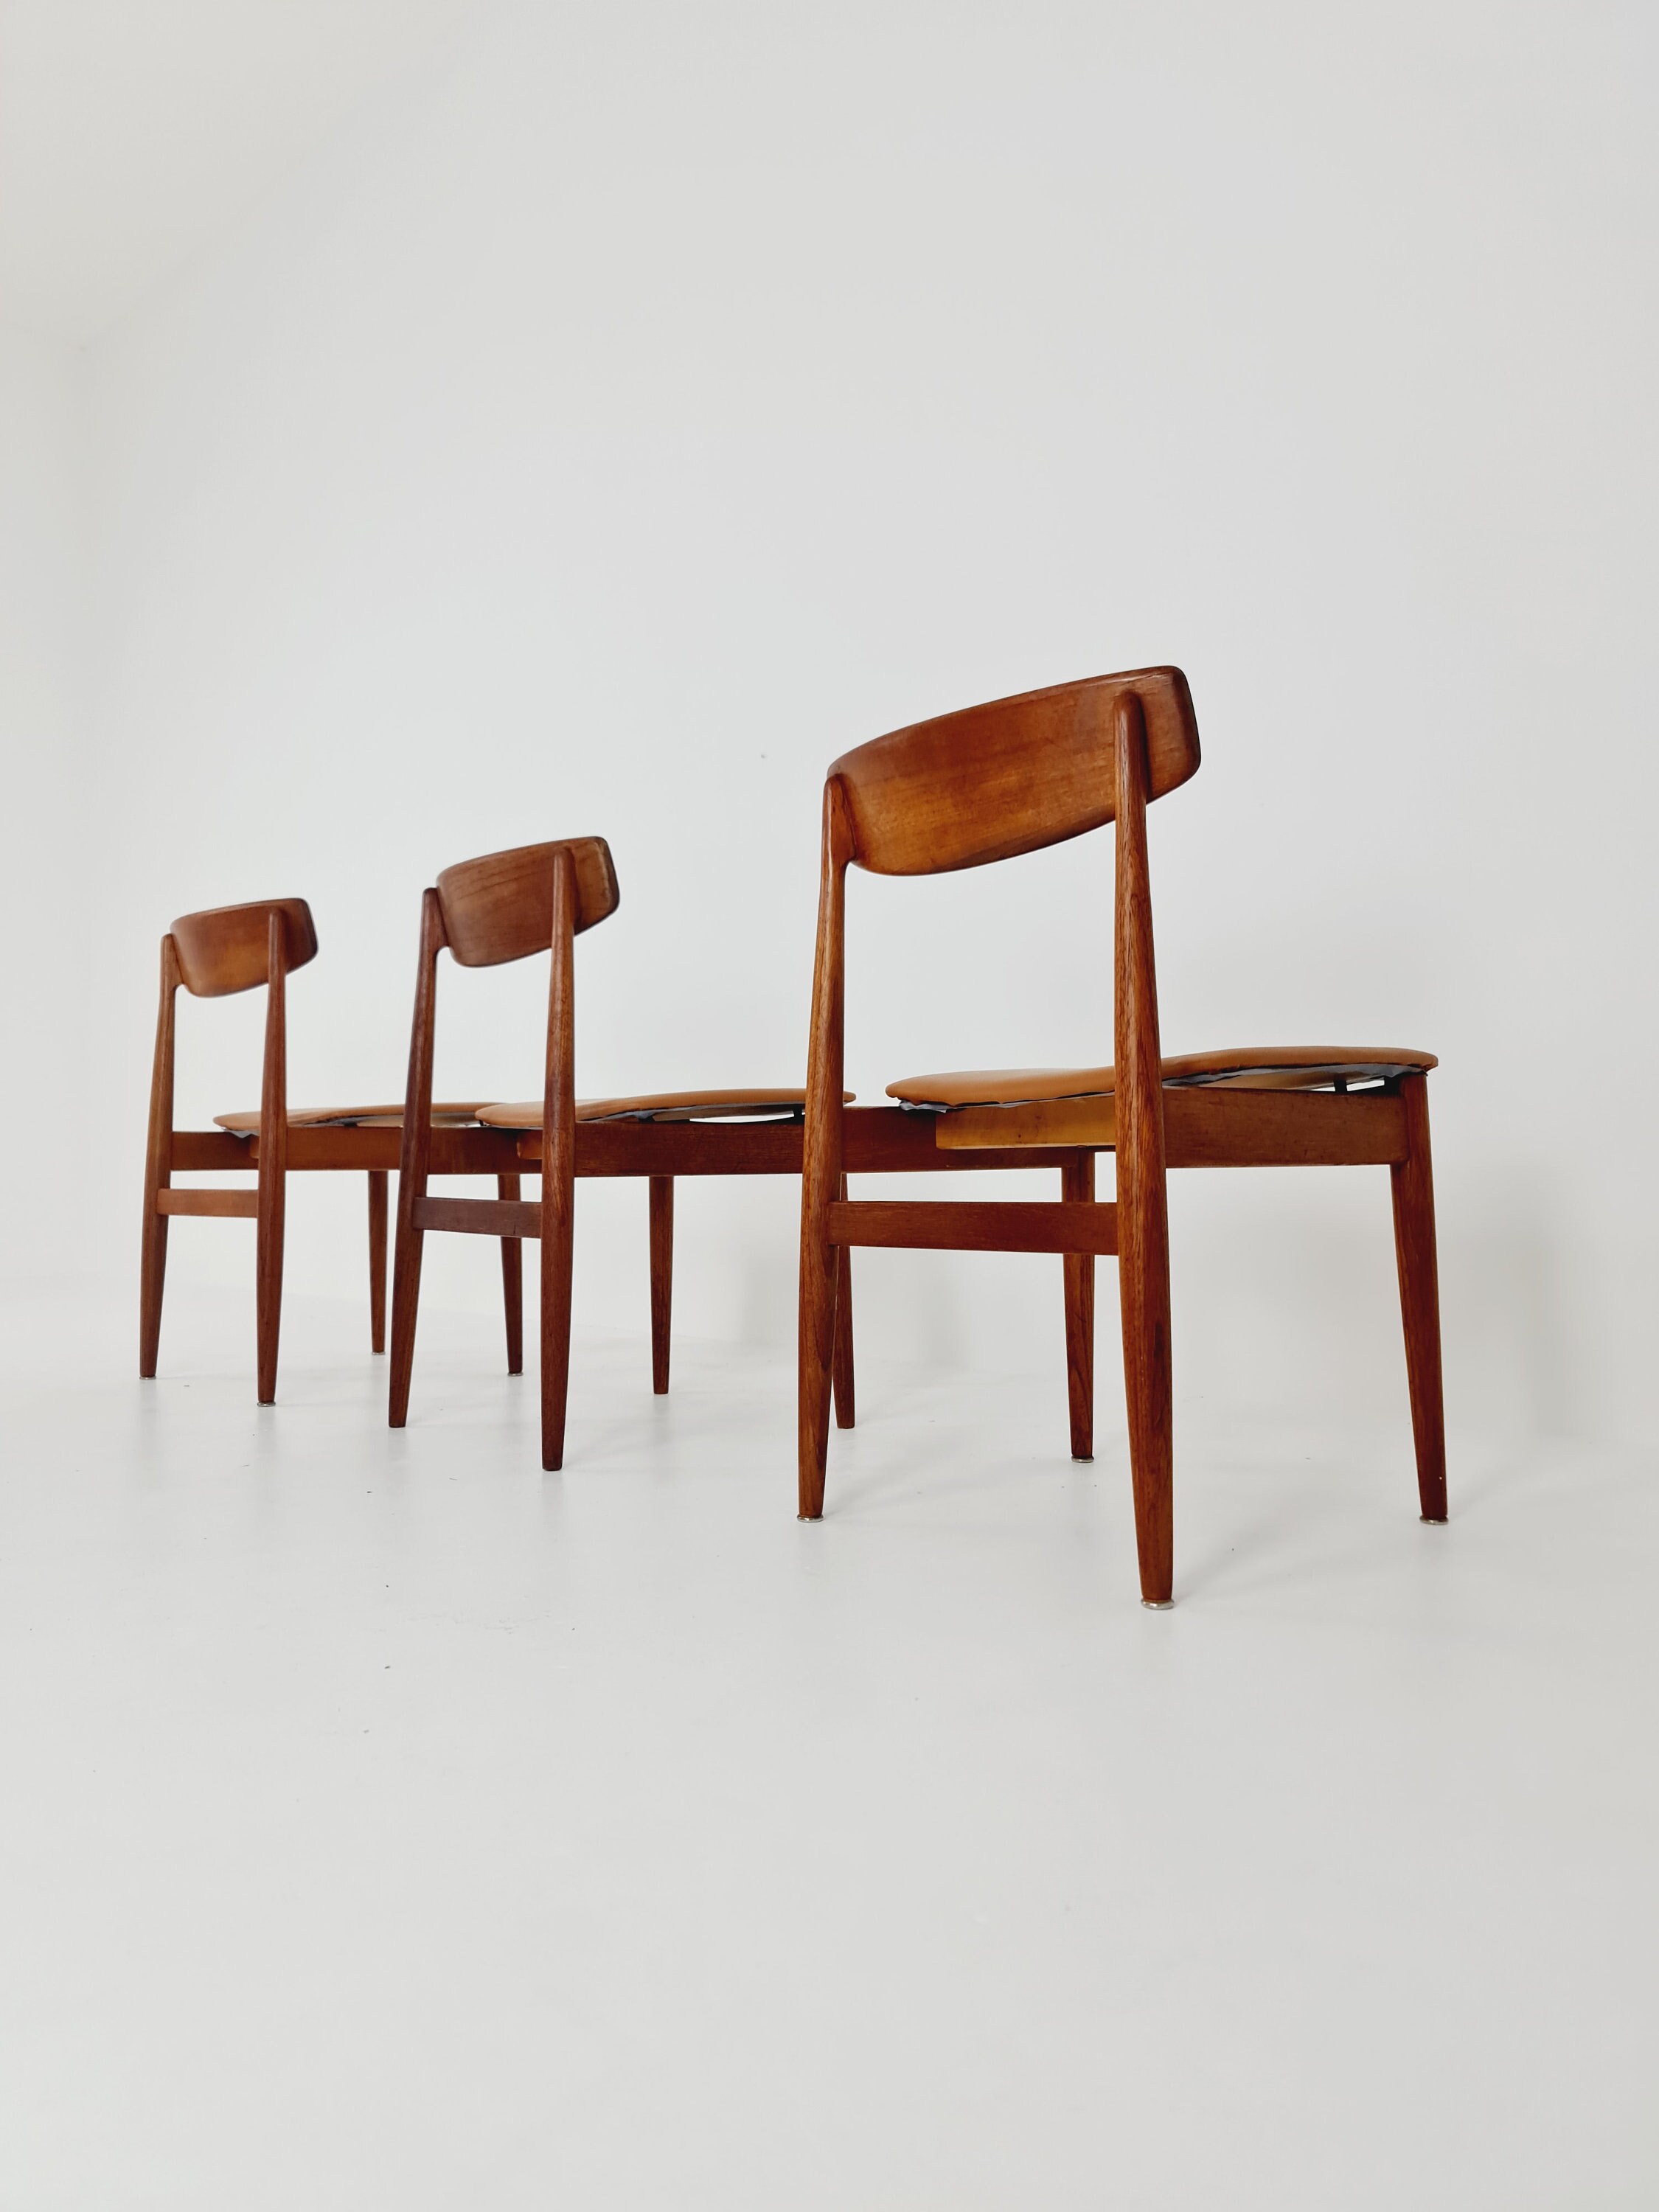 Cocktail Chairs, Steel, Leather, Fur, Teak. Vintage, Denmark, Anonymous. -   Norway